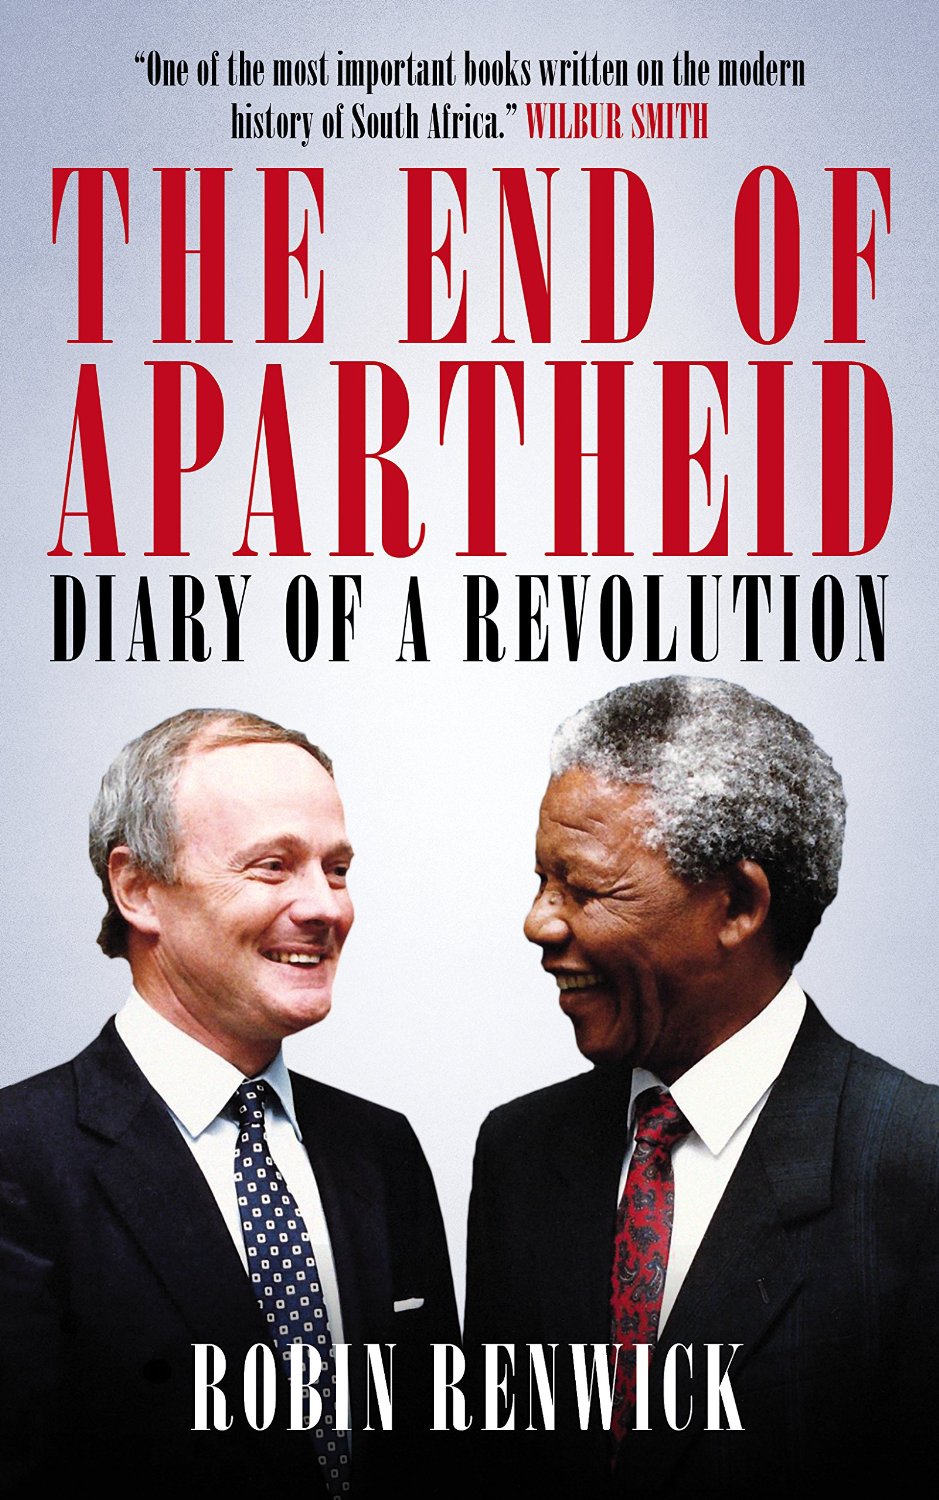 The End Of Apartheid: Diary Of A Revolution